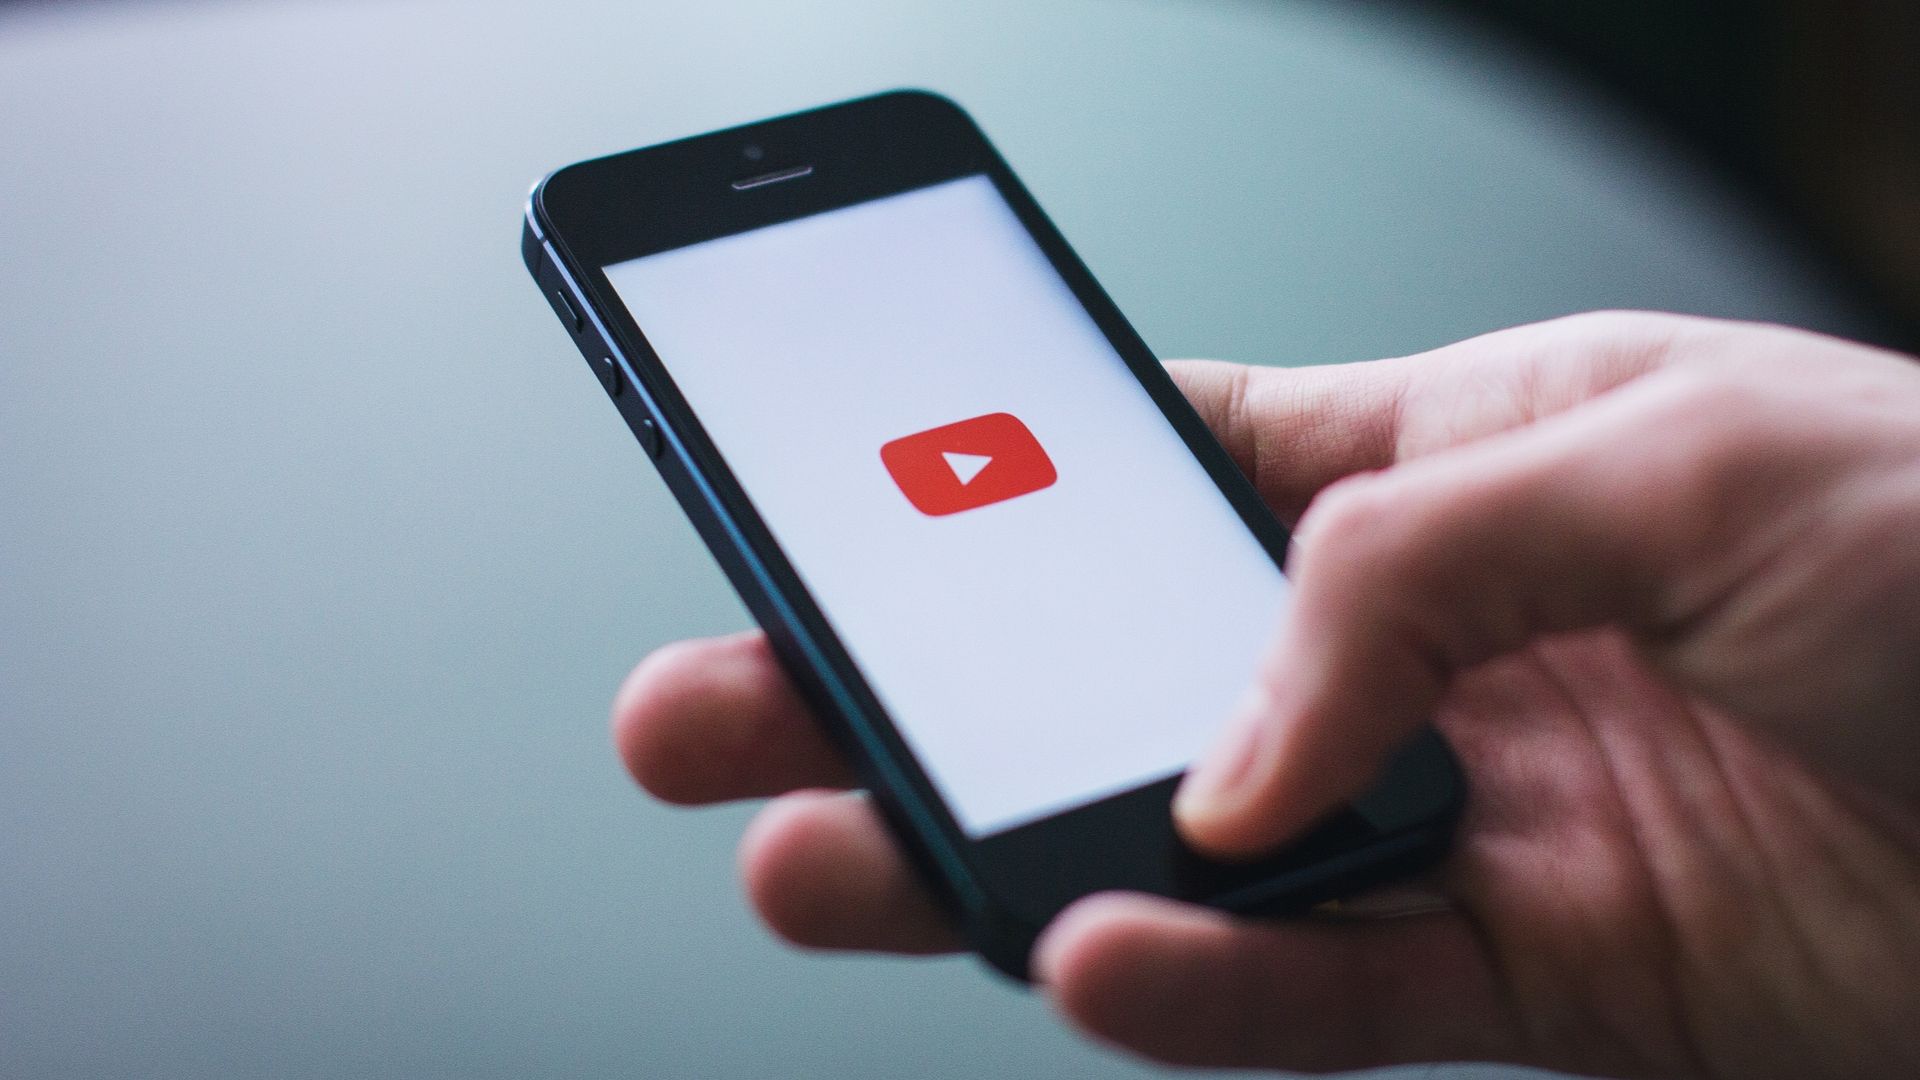 5 Simple Steps to Make Your YouTube Channel Look Great